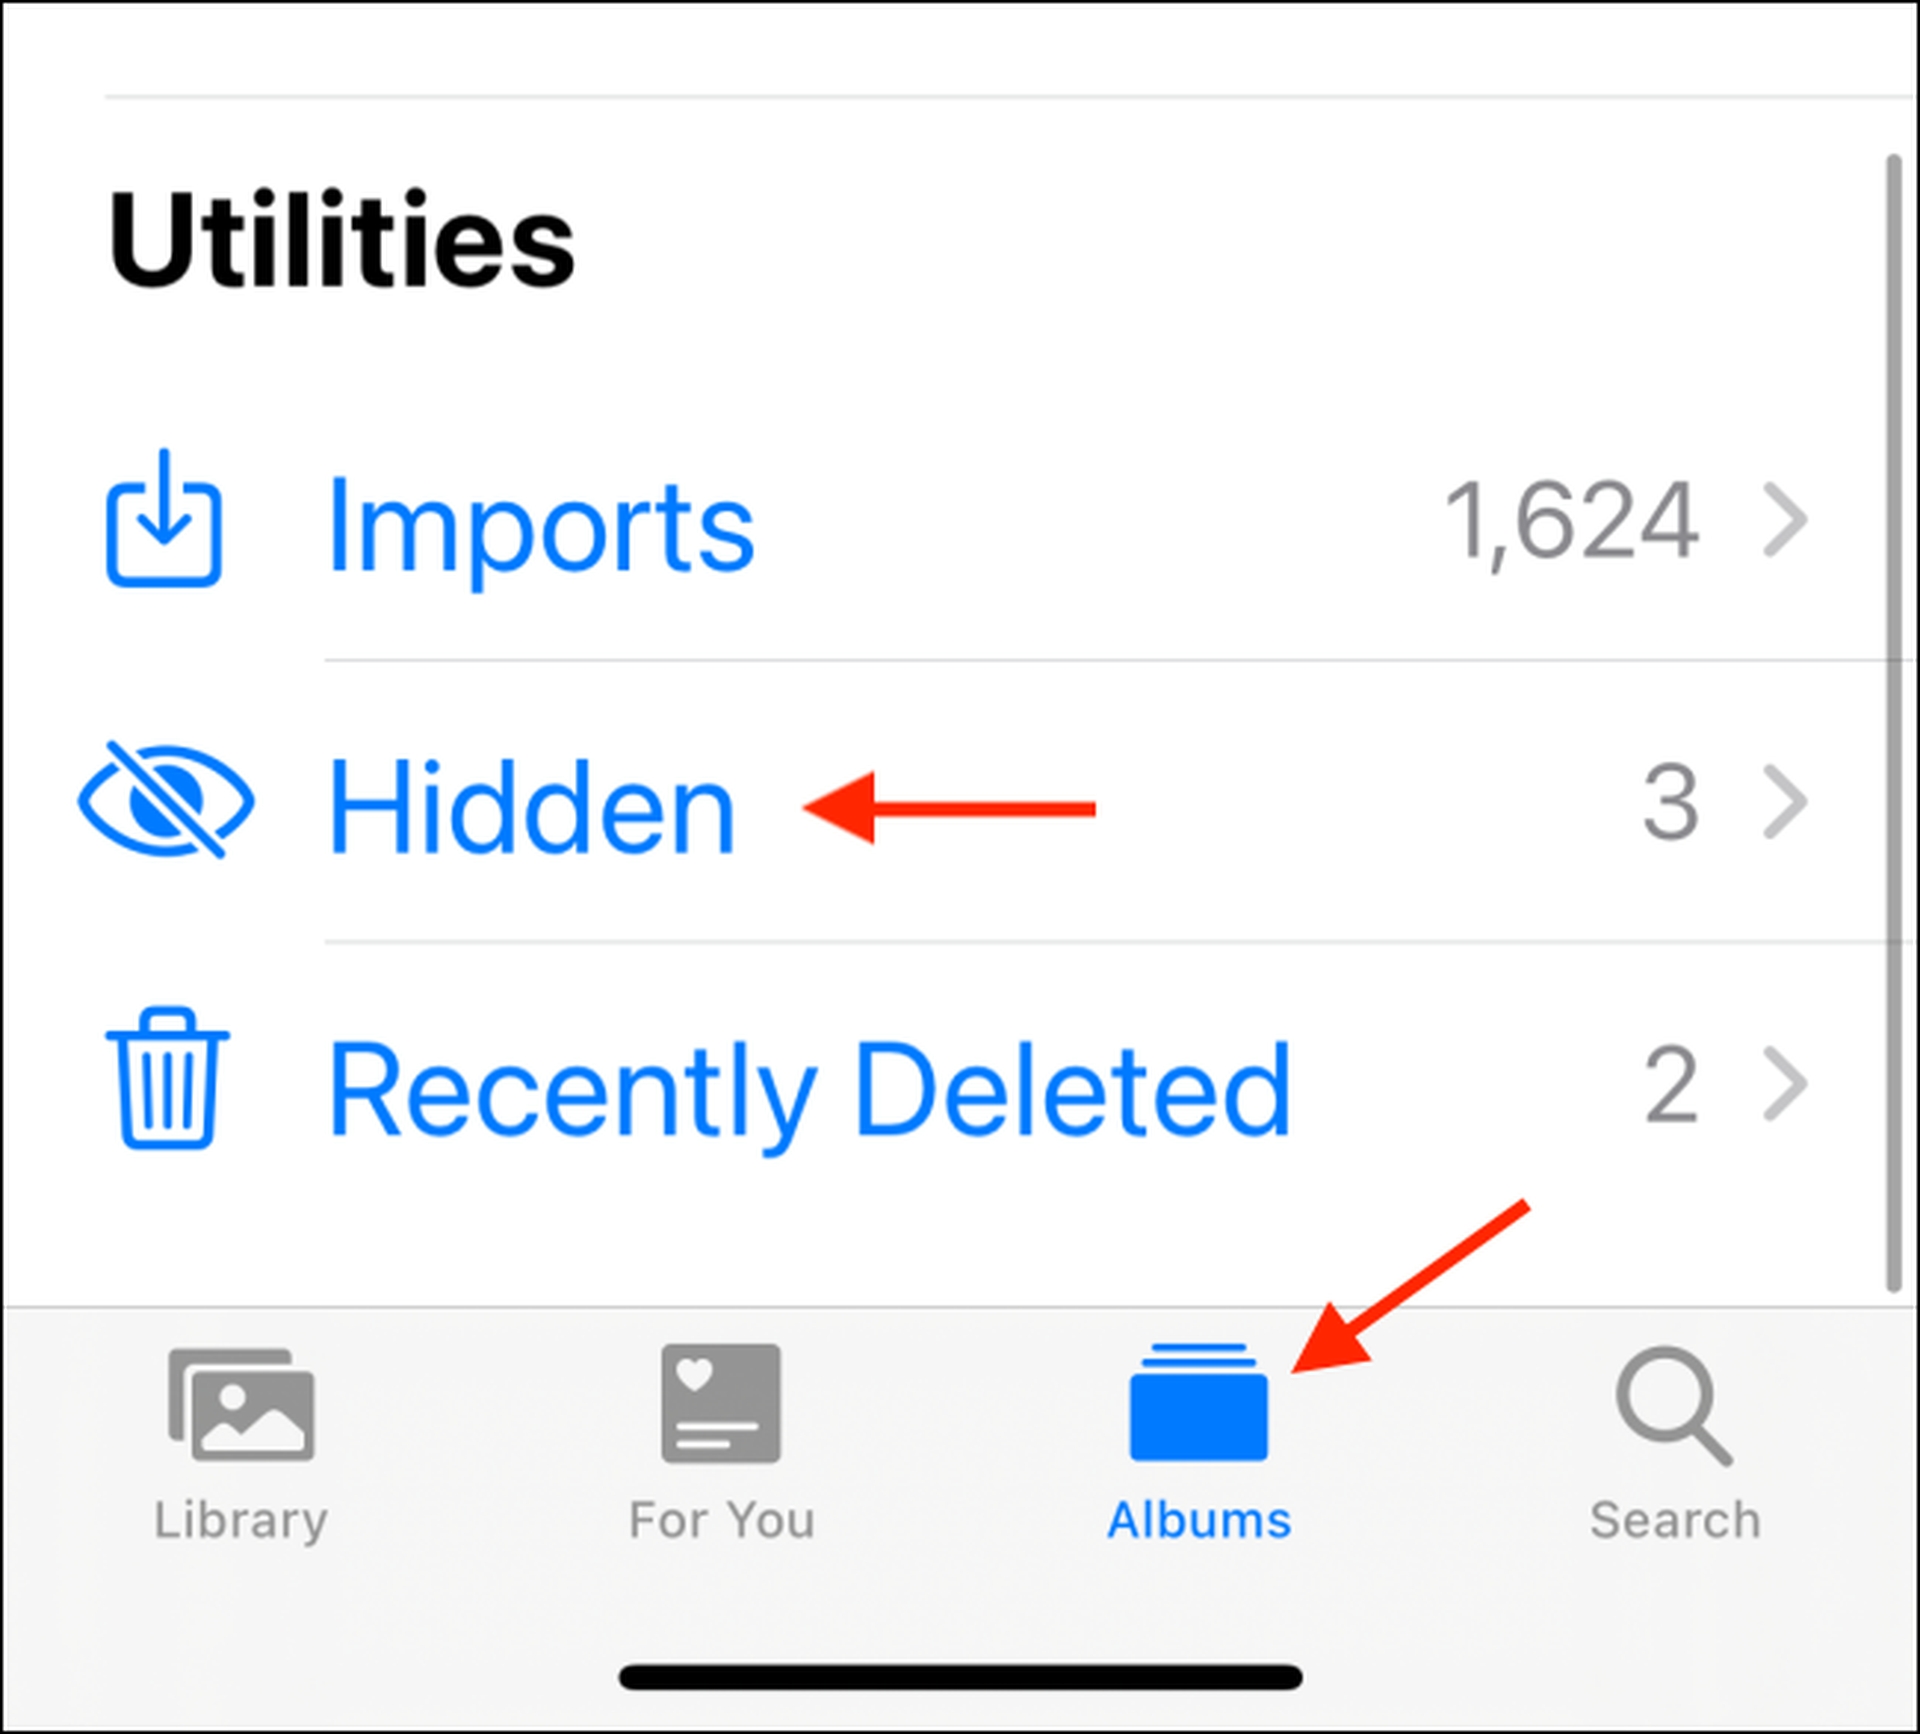 Today, we are going to go over how to hide pictures on iPhone, so you can protect your personal images safe from people who might snoop around on your phone.